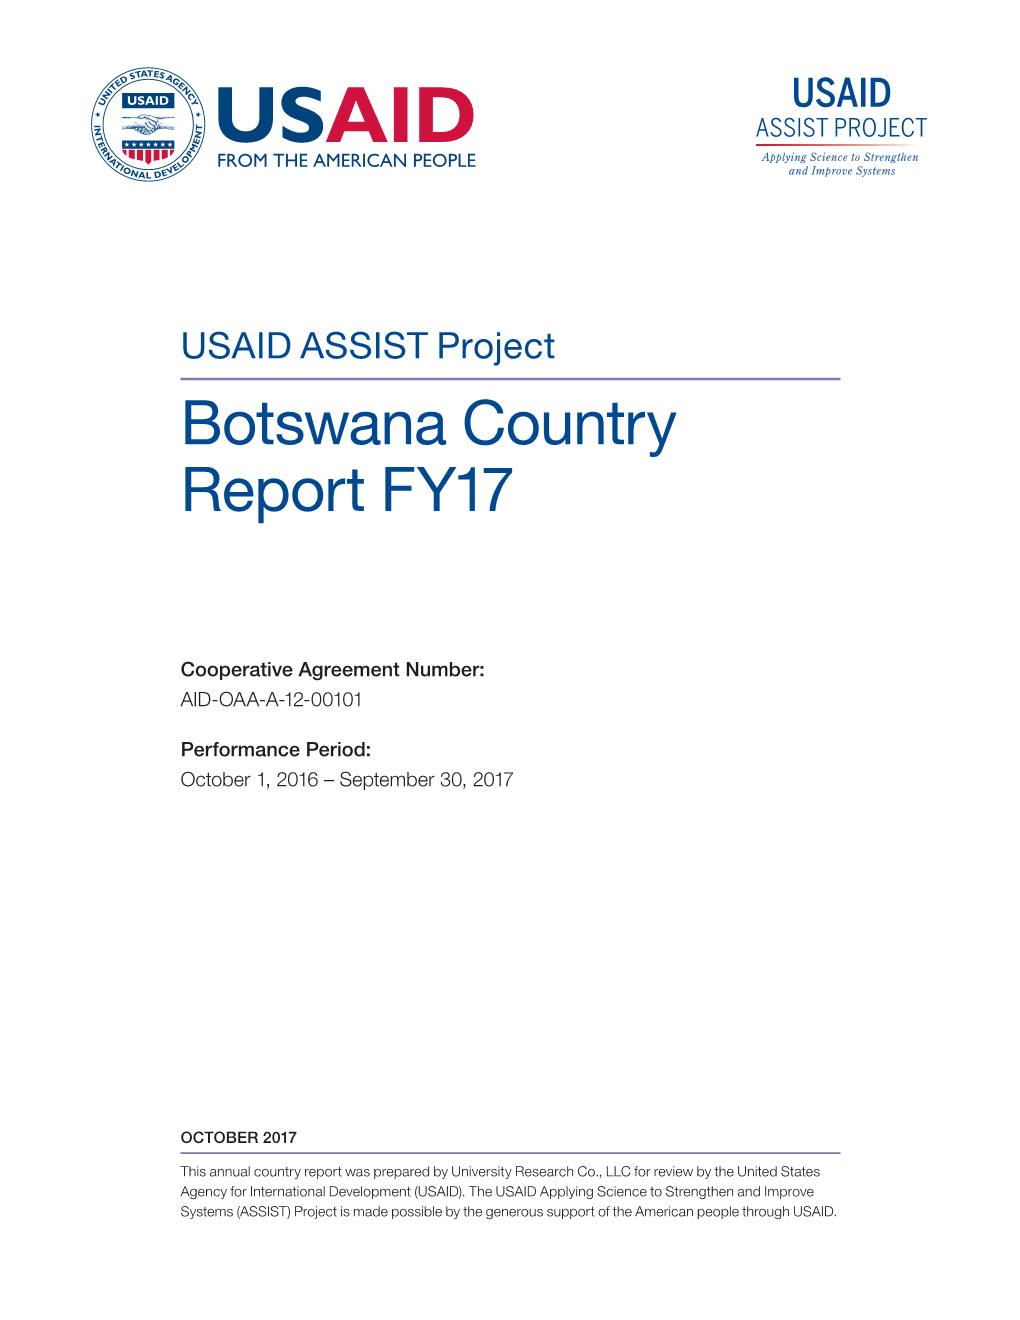 USAID ASSIST Project: Botswana Country Report FY17